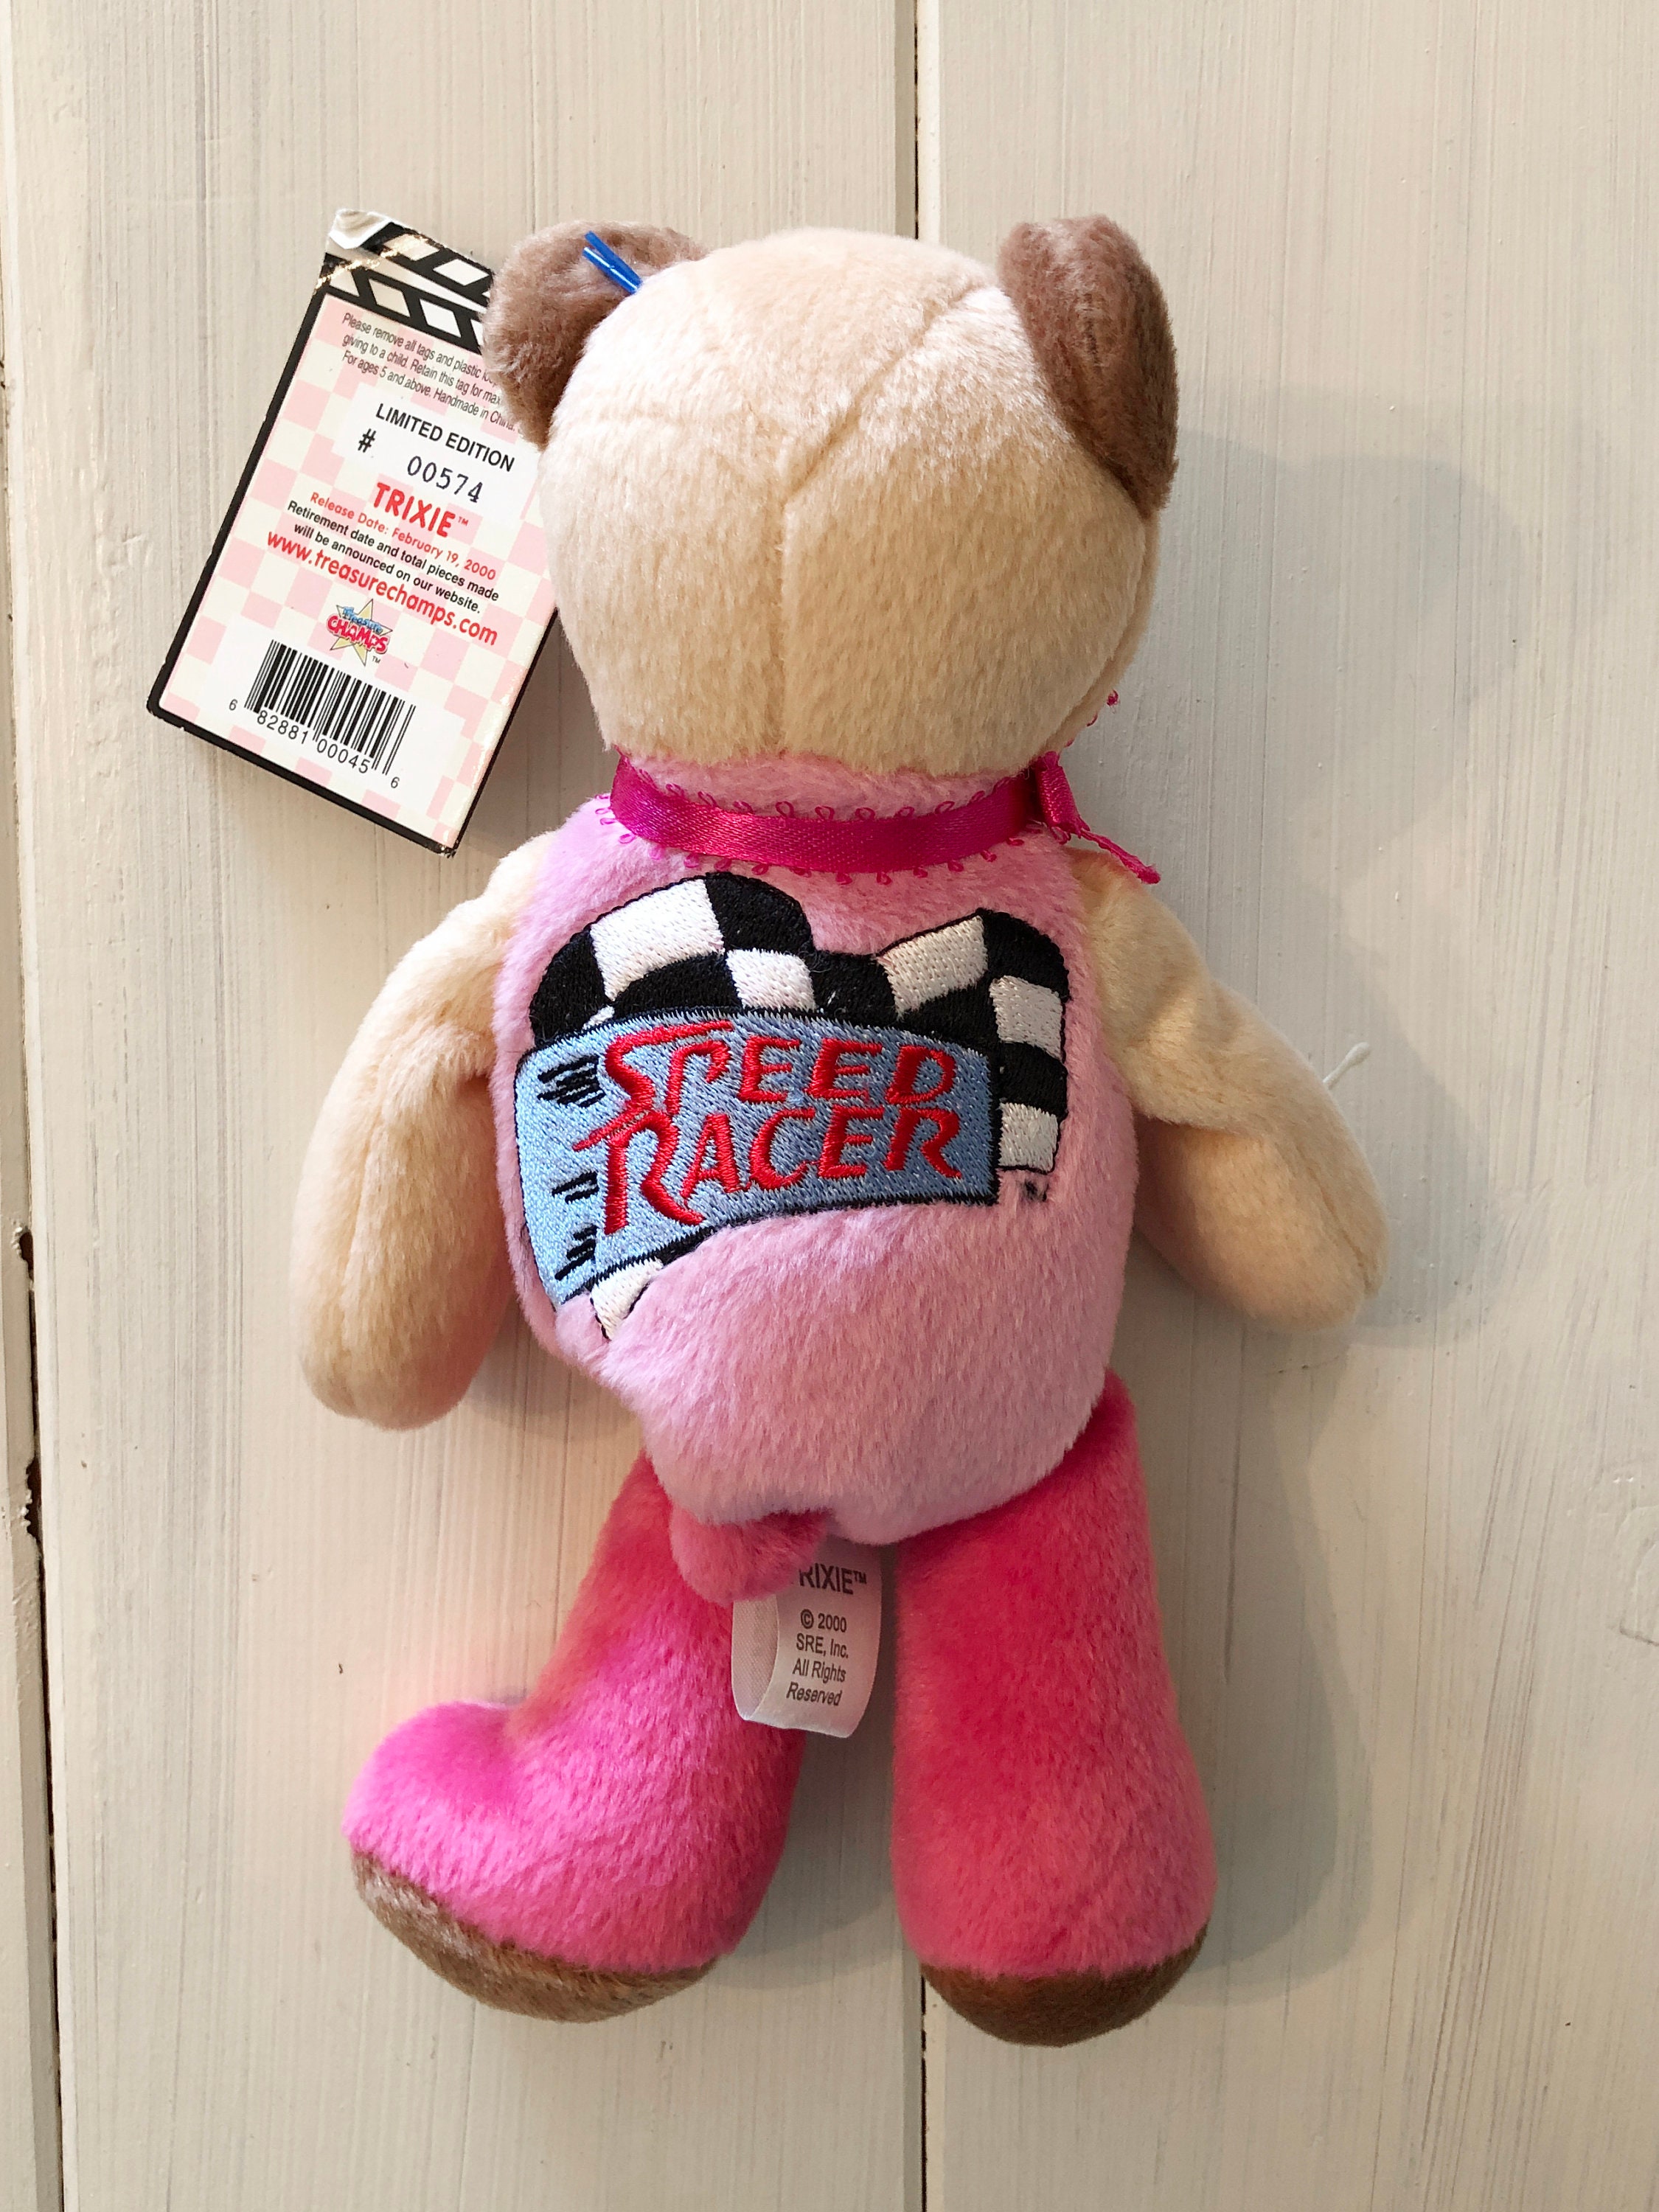 Retired 2000 Speed Racer & Trixie Hollywood Huggables Limited Edition Bears